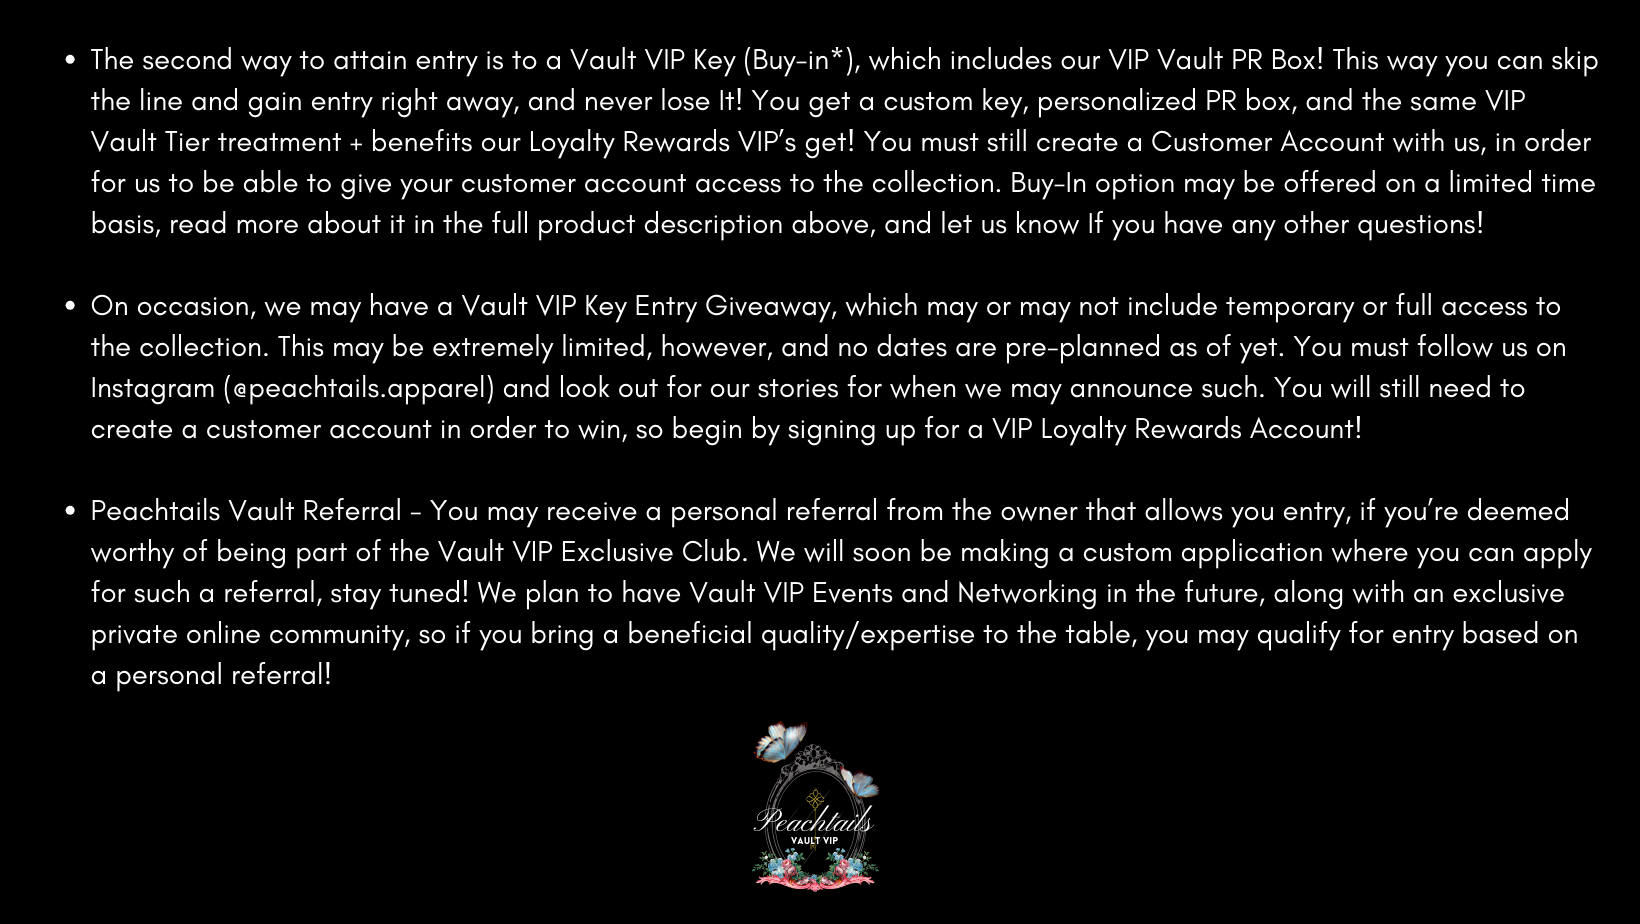 The image contains text explaining three ways to gain entry to a Vault VIP program, involving a buy-in option, a giveaway, and a personal referral. It mentions the benefits of a custom key, personalized PR box, and special treatment. Instructions include following on Instagram and signing up for a loyalty account.